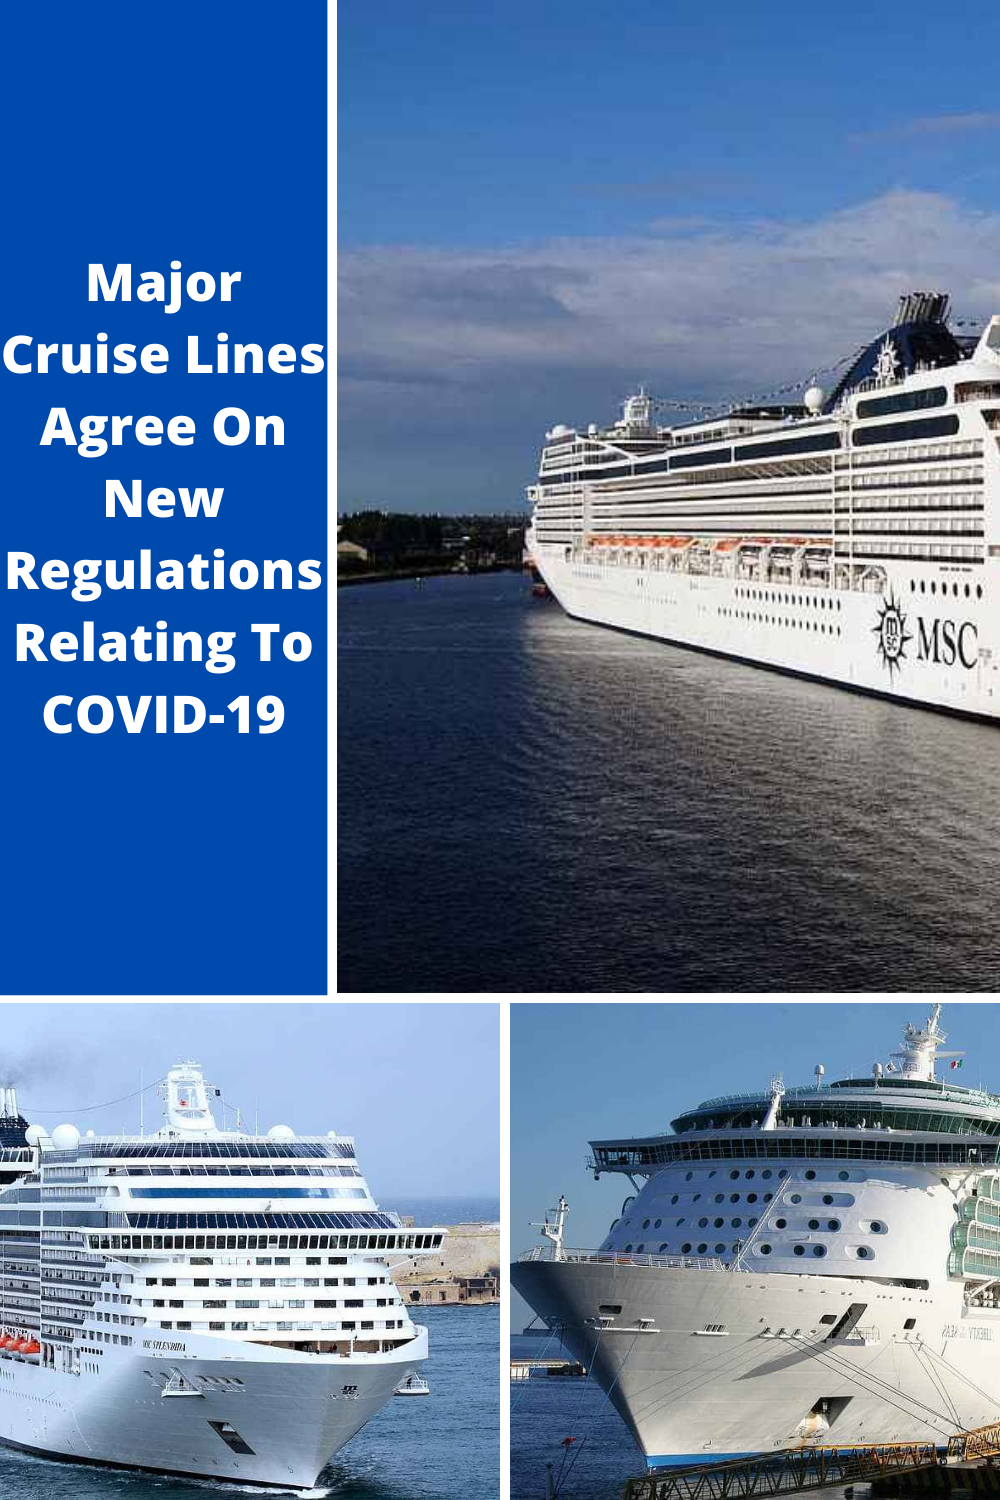 Cruise Lines To Require Negative COVID-19 Tests For All Passengers